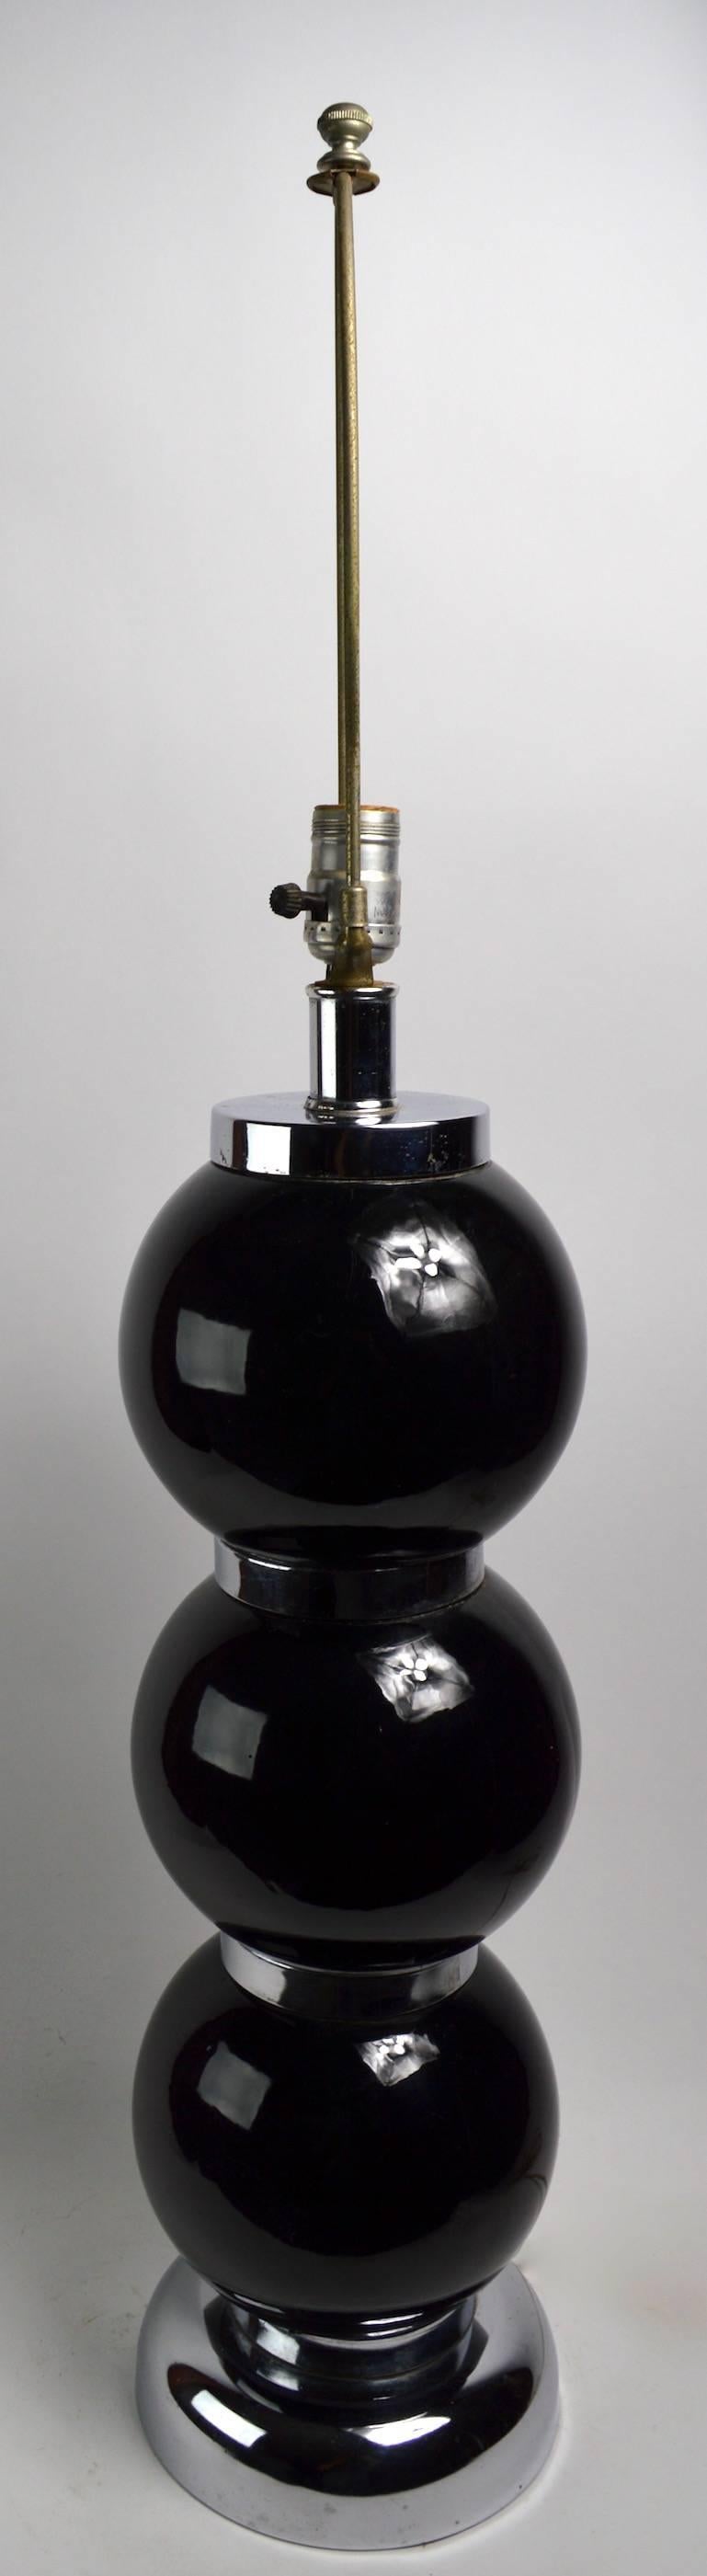 20th Century Pair of Black Chrome Ball Lamps by Kovacs